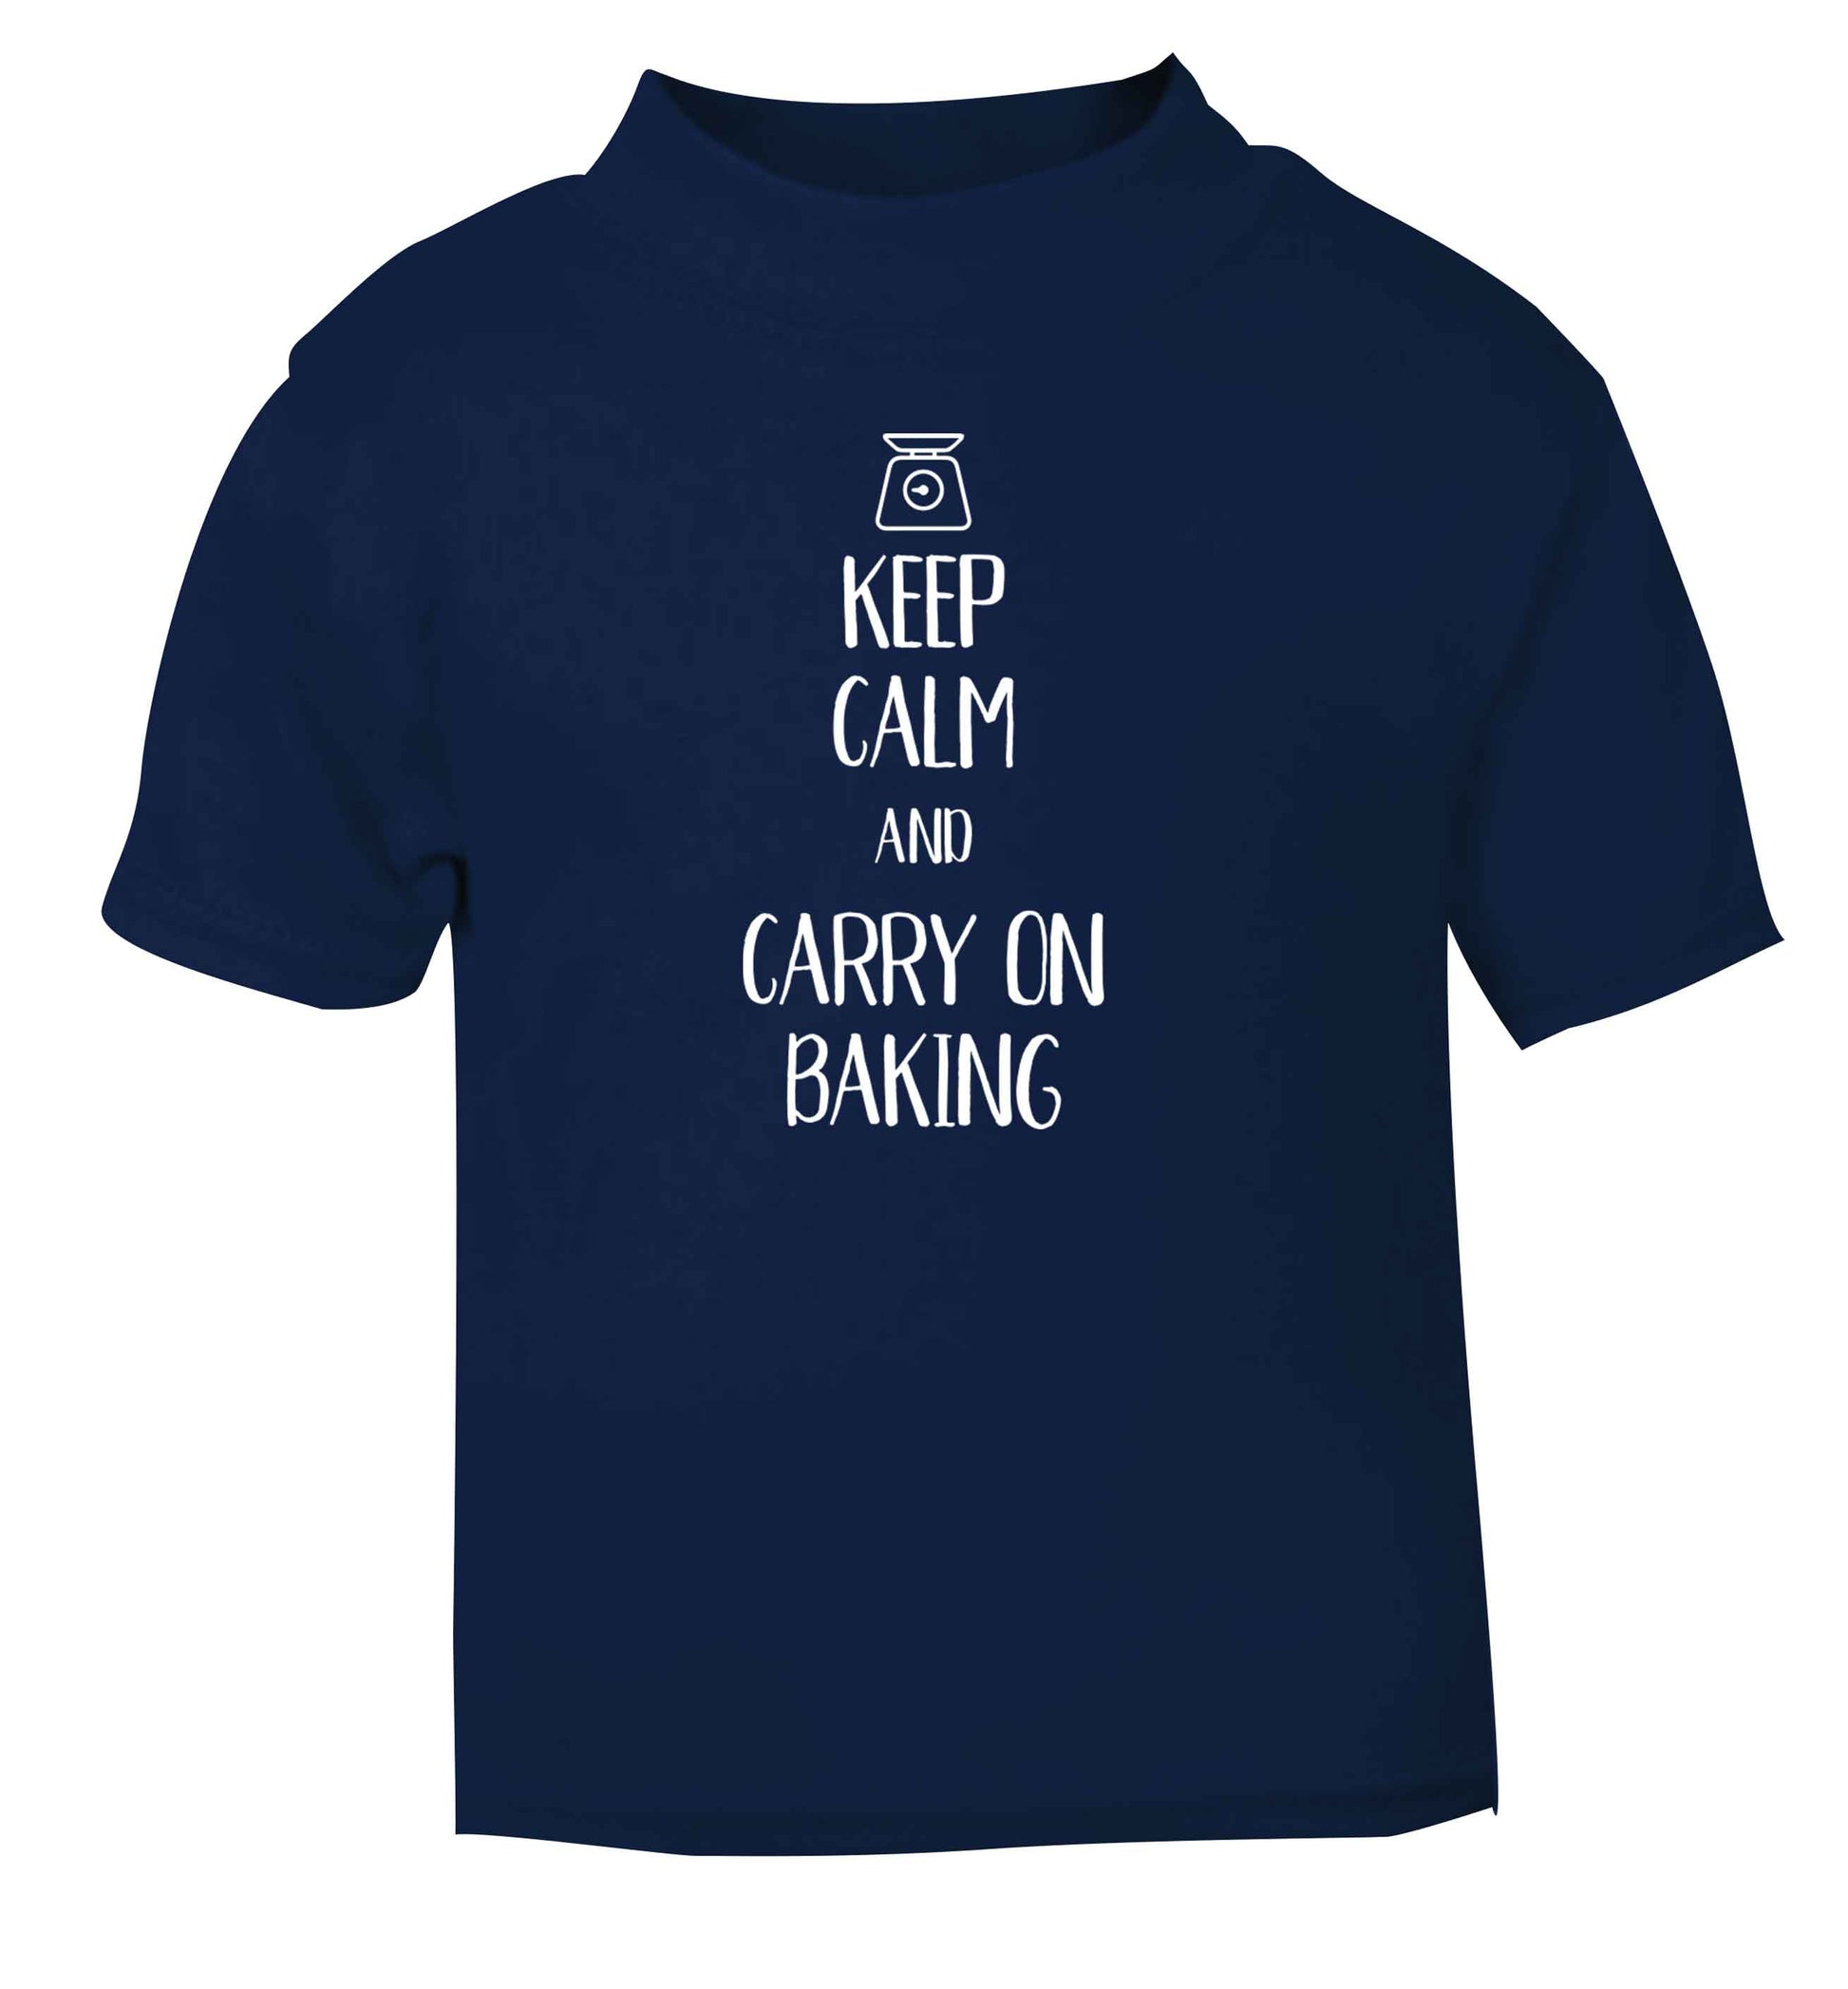 Keep calm and carry on baking navy Baby Toddler Tshirt 2 Years